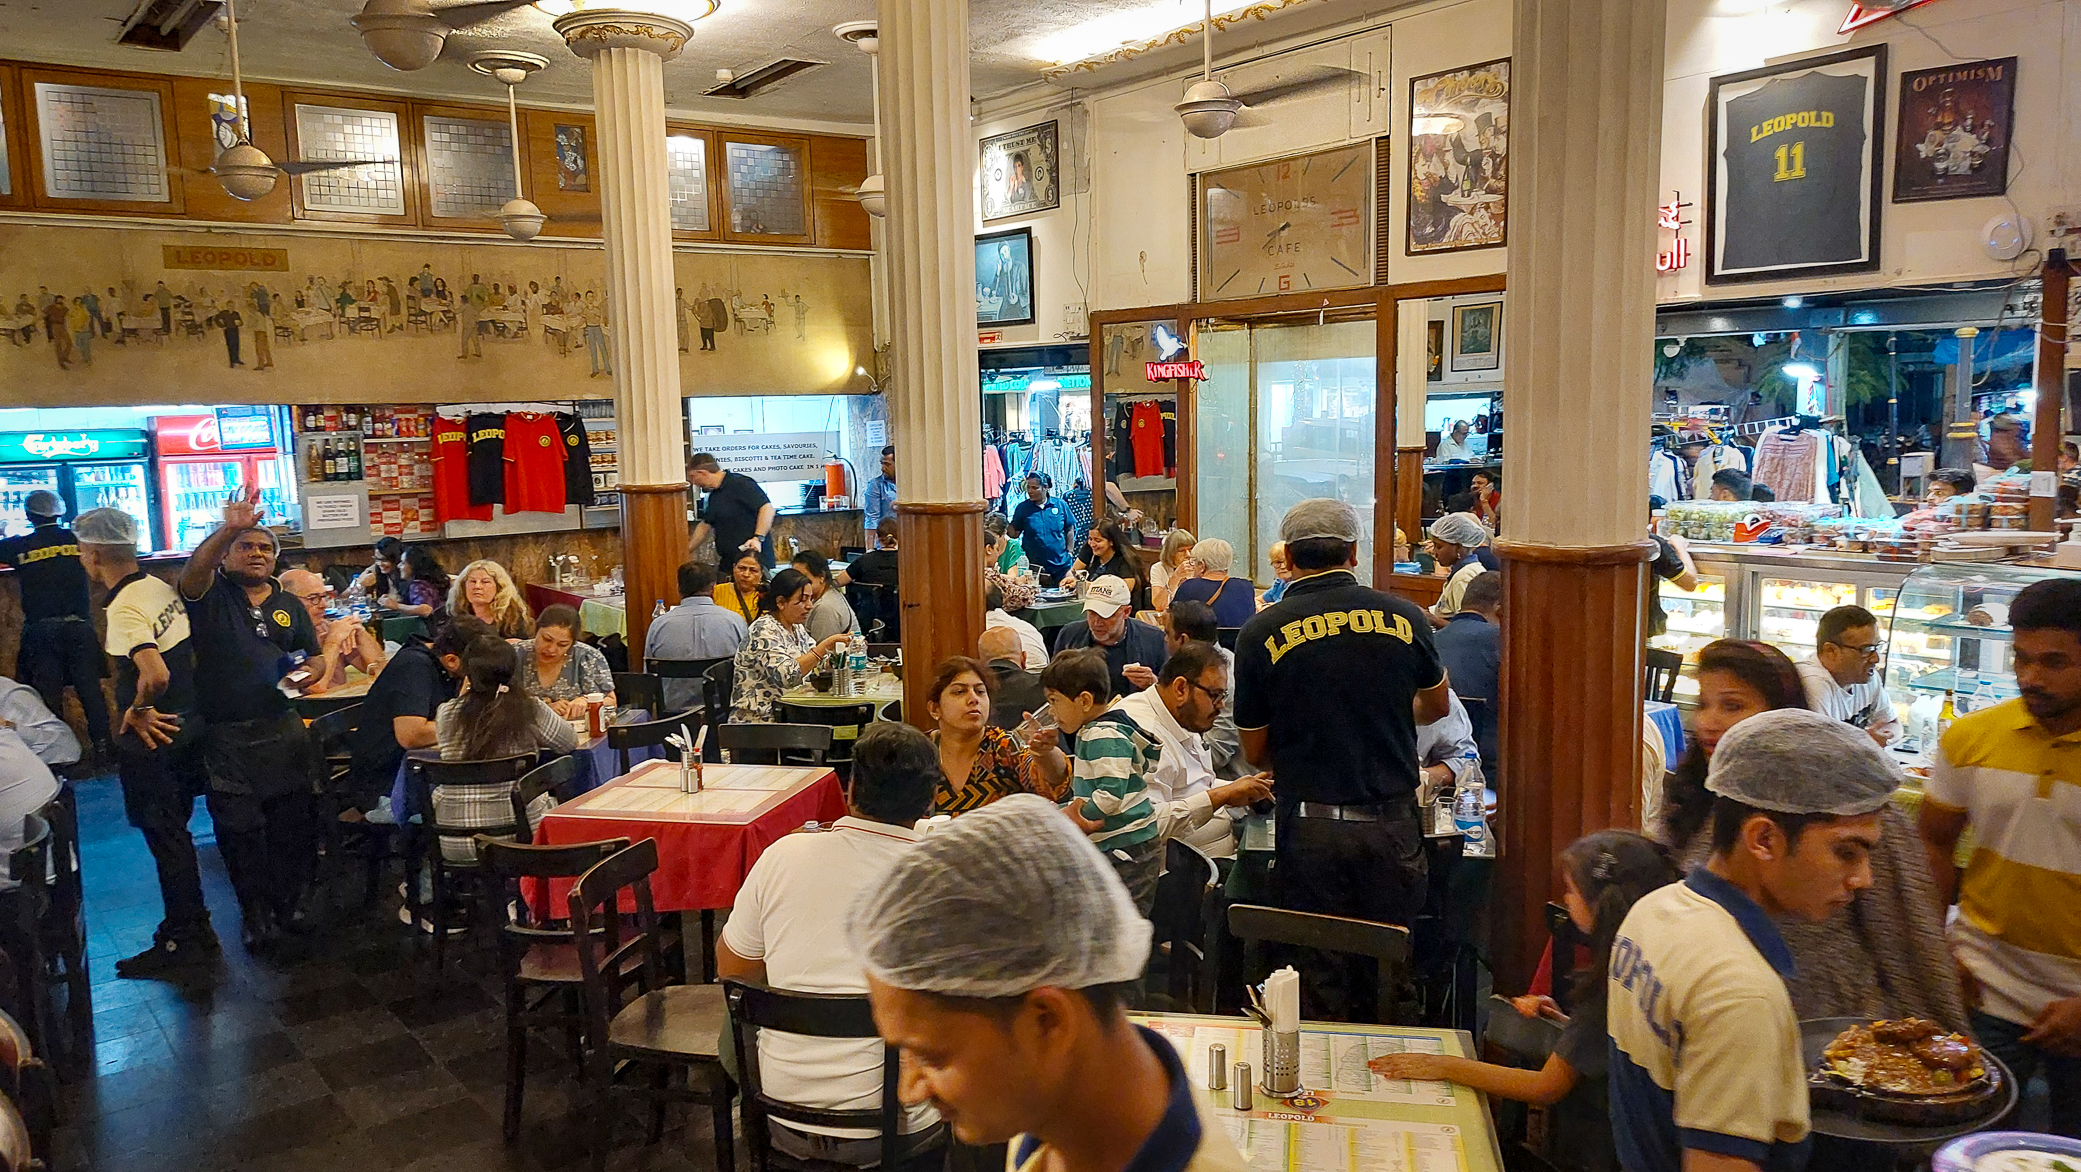 <span  class="uc_style_uc_tiles_grid_image_elementor_uc_items_attribute_title" style="color:#ffffff;">the glorious 'Leopold Cafe'</span>